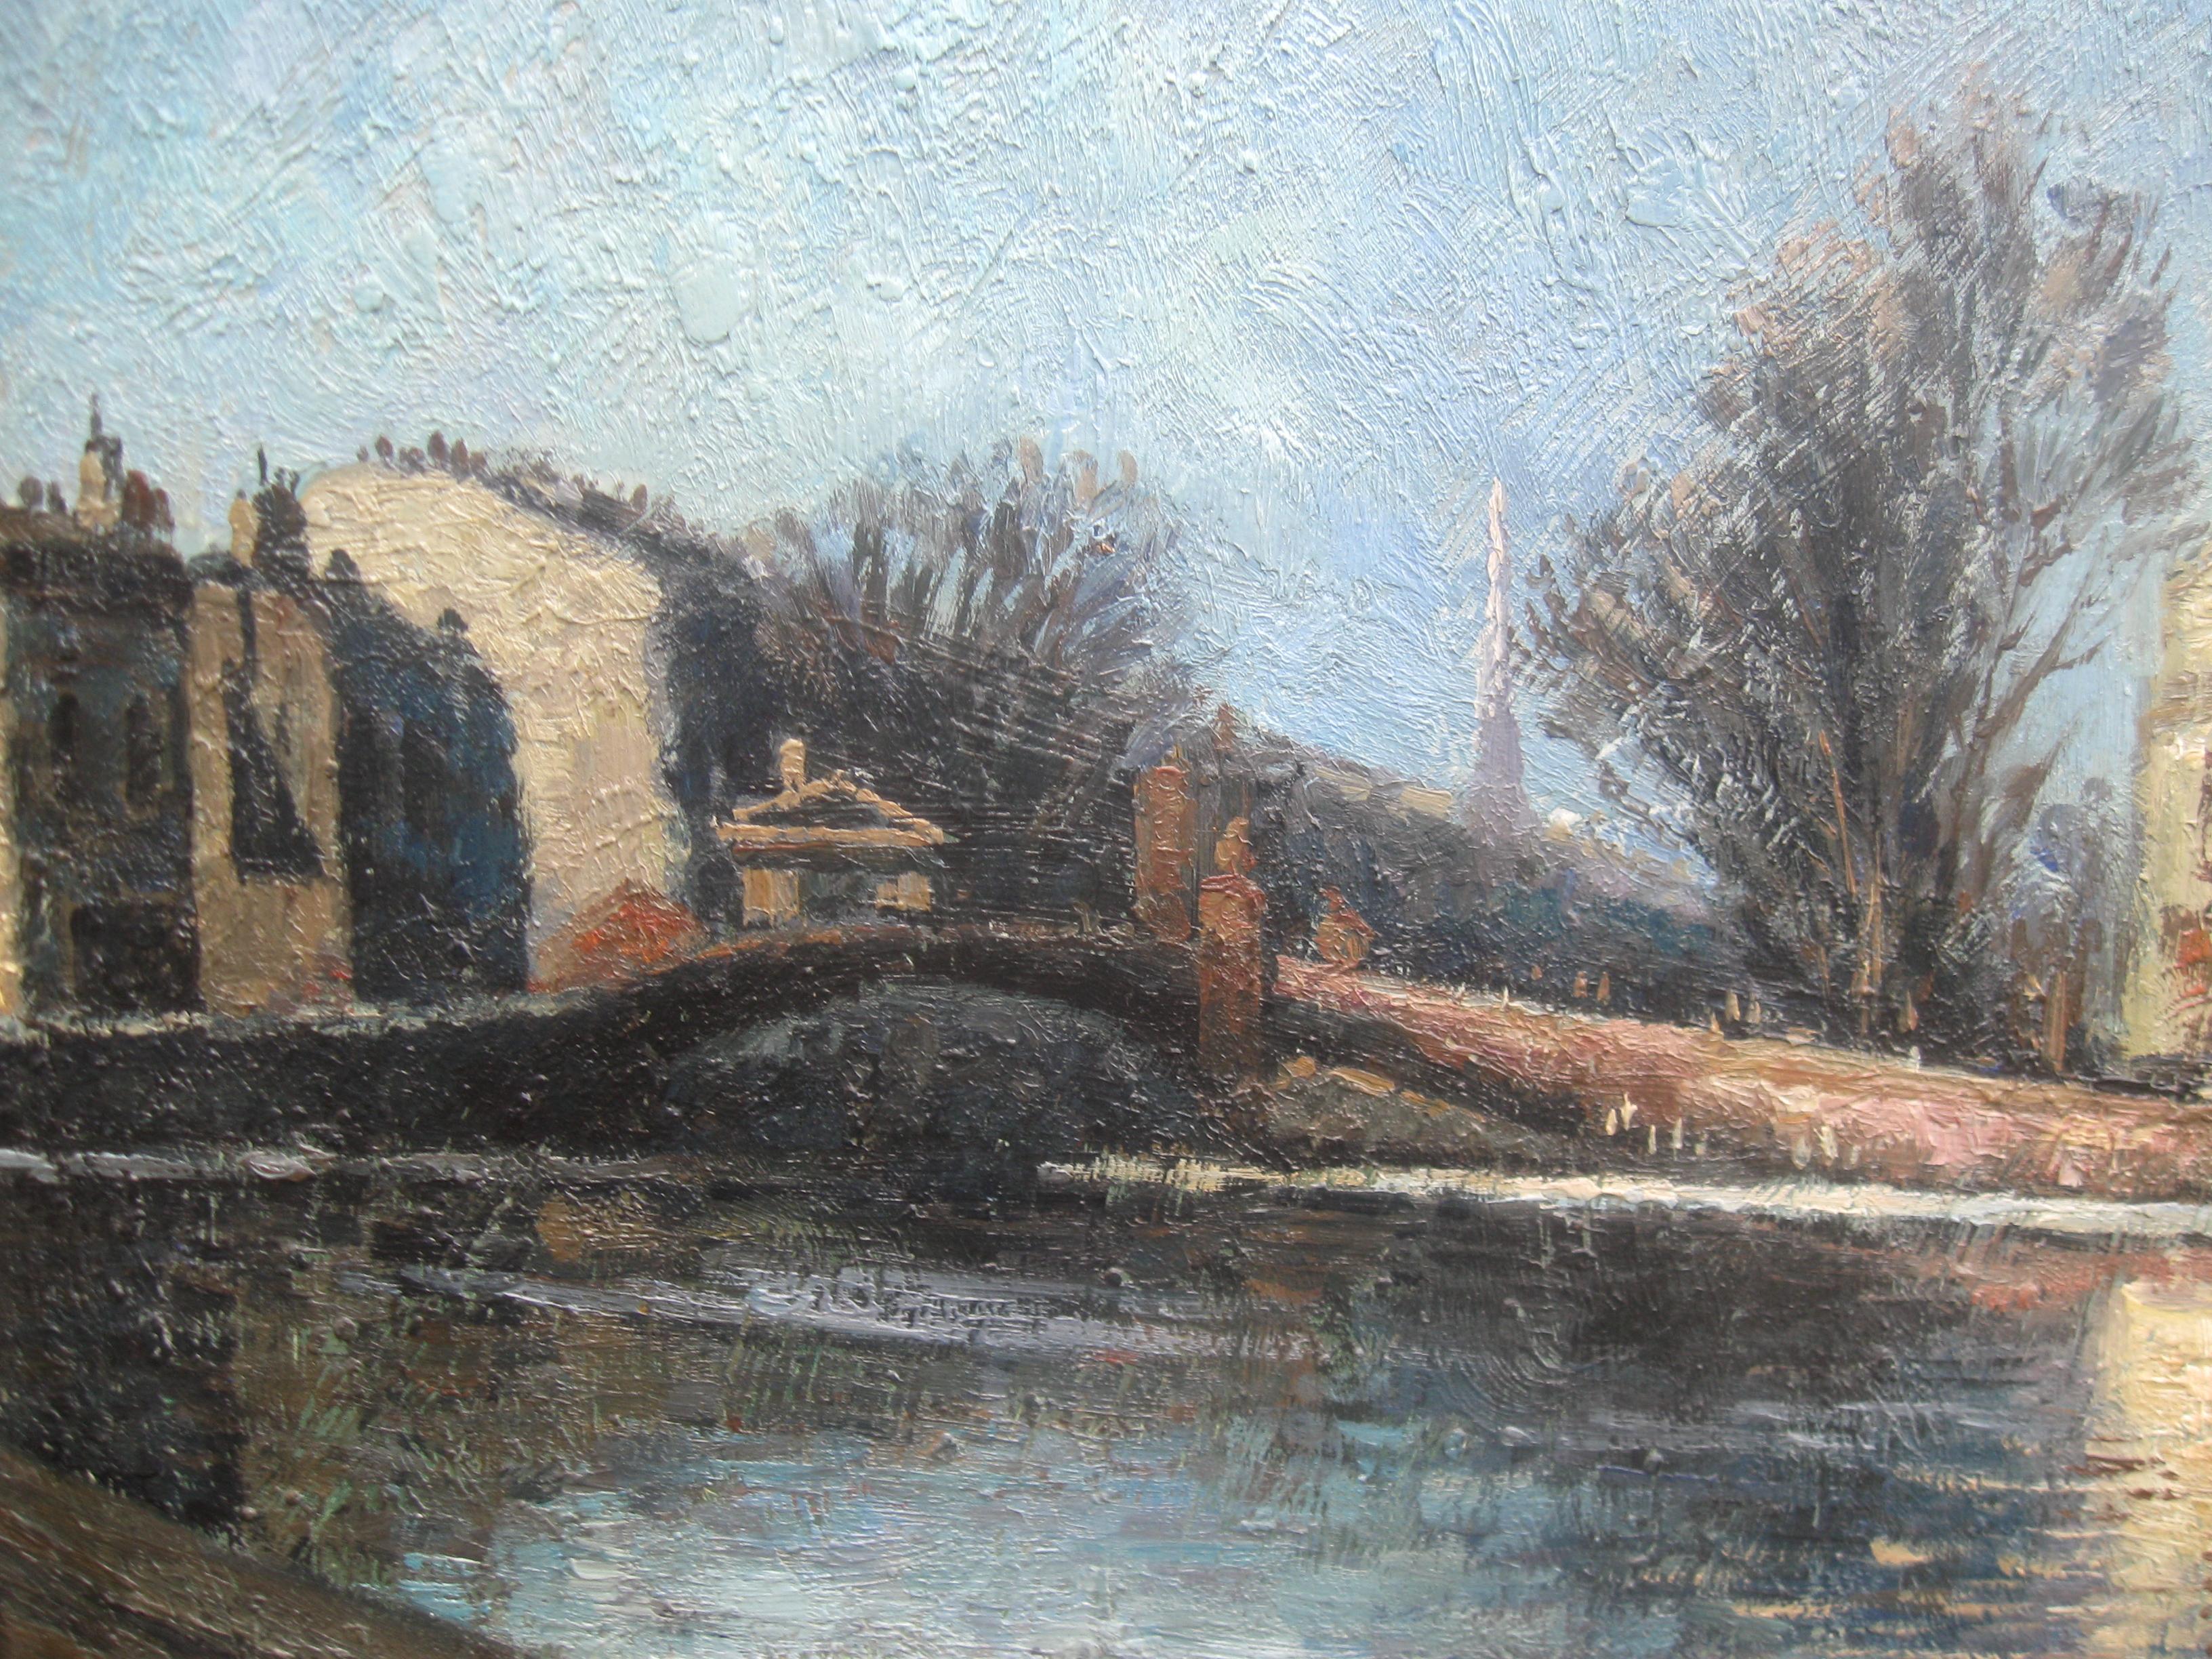 French Impressionist 'View of The River Seine, Paris'  oil on panel dating from the mid 20th Century.
Fine impastoed technique. Painted in sunlight capturing the reflections of the grand Parisian buildings lining  the river streets and bridges. Fine